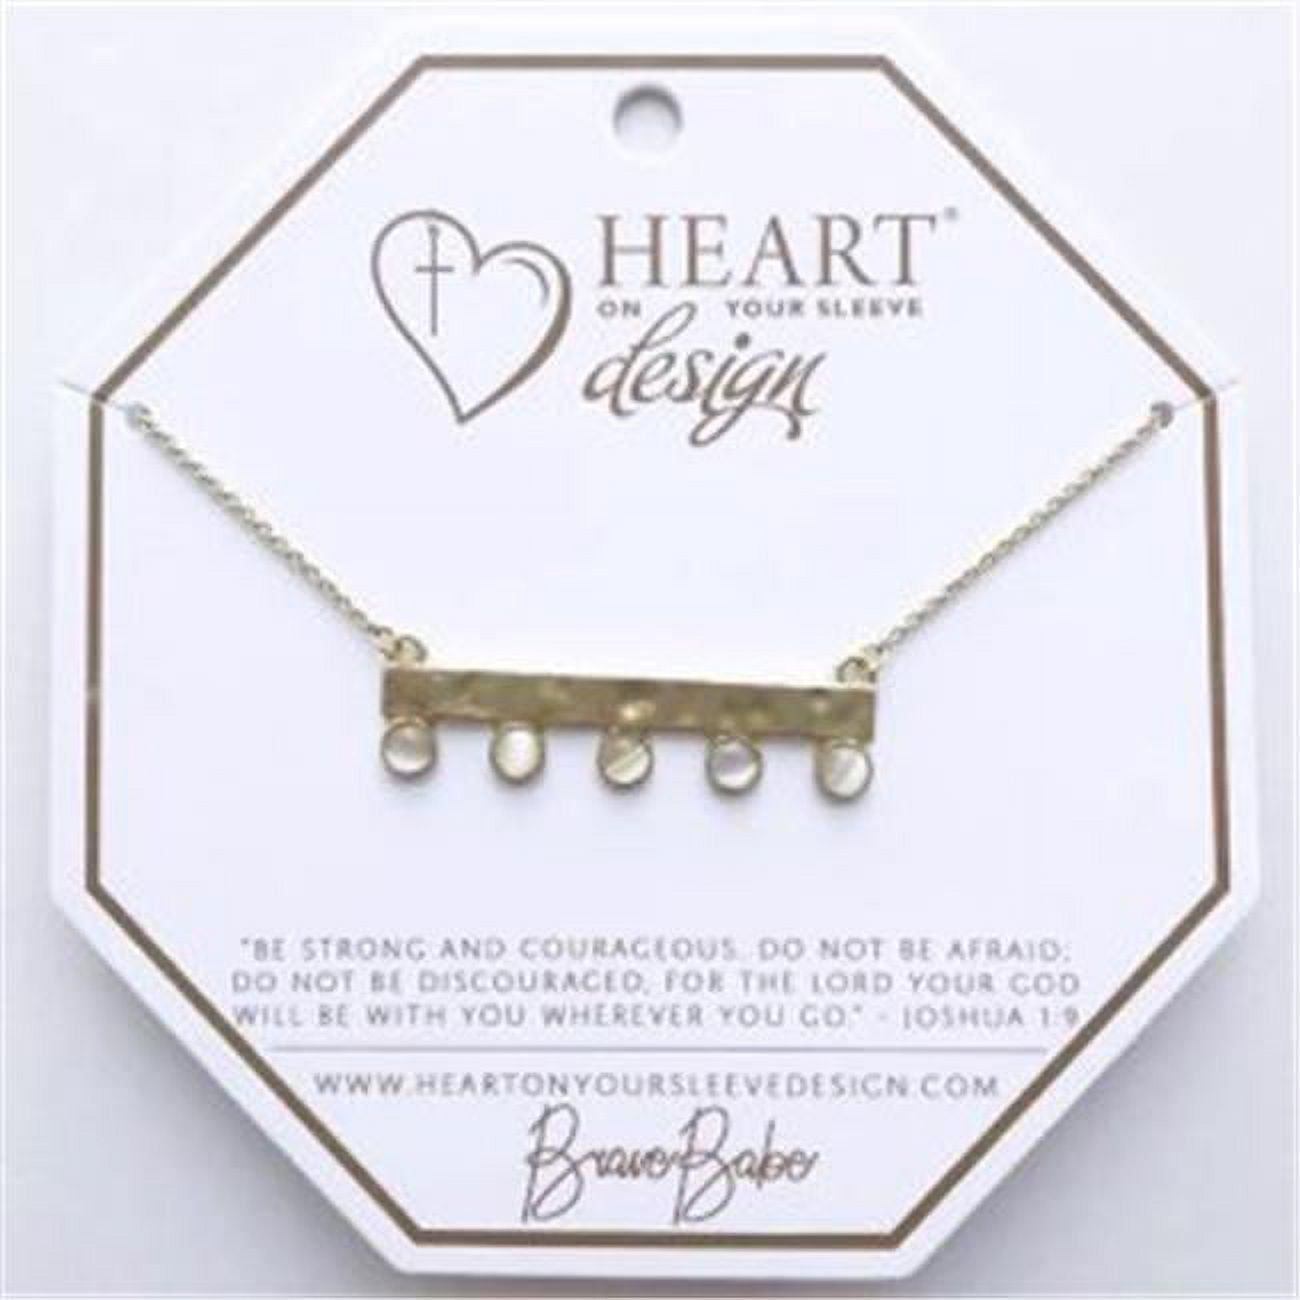 Heart On Your Sleeve Design 139335 14k Gold Bar Brave Babe Brulee Necklace With White Stone Accents